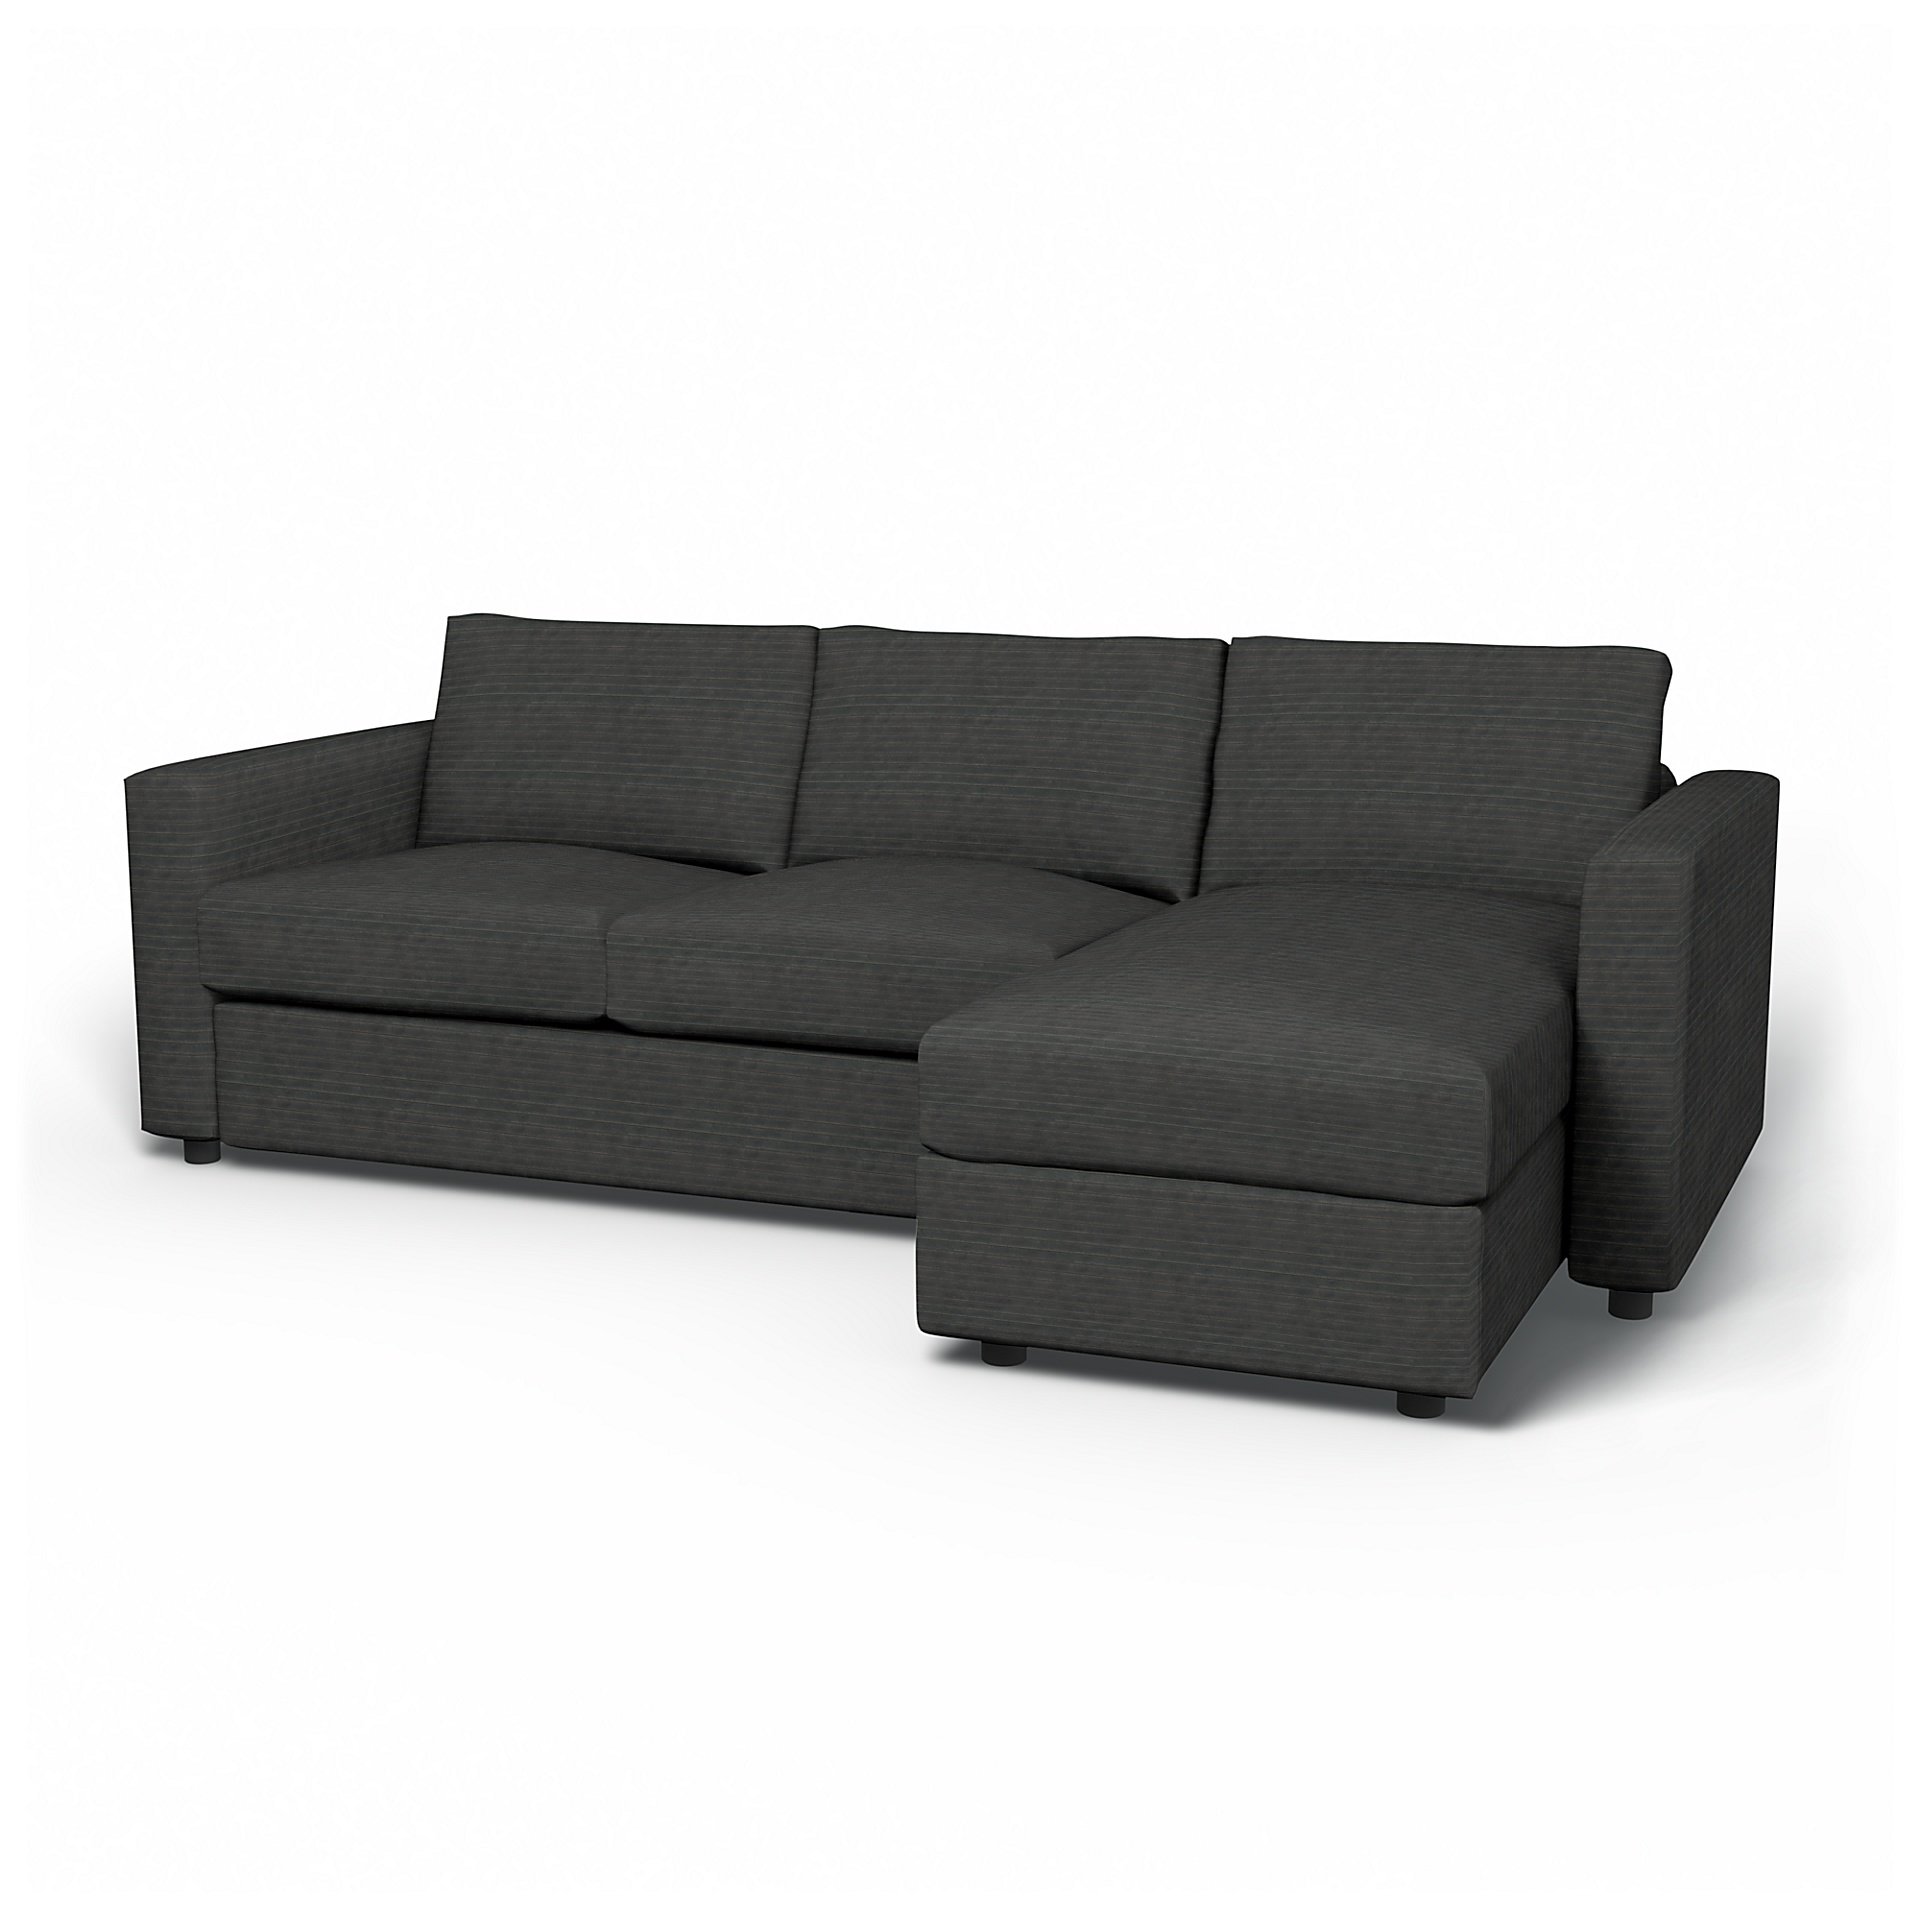 IKEA - Vimle 2 Seater Sofa with Chaise Cover, Licorice, Corduroy - Bemz